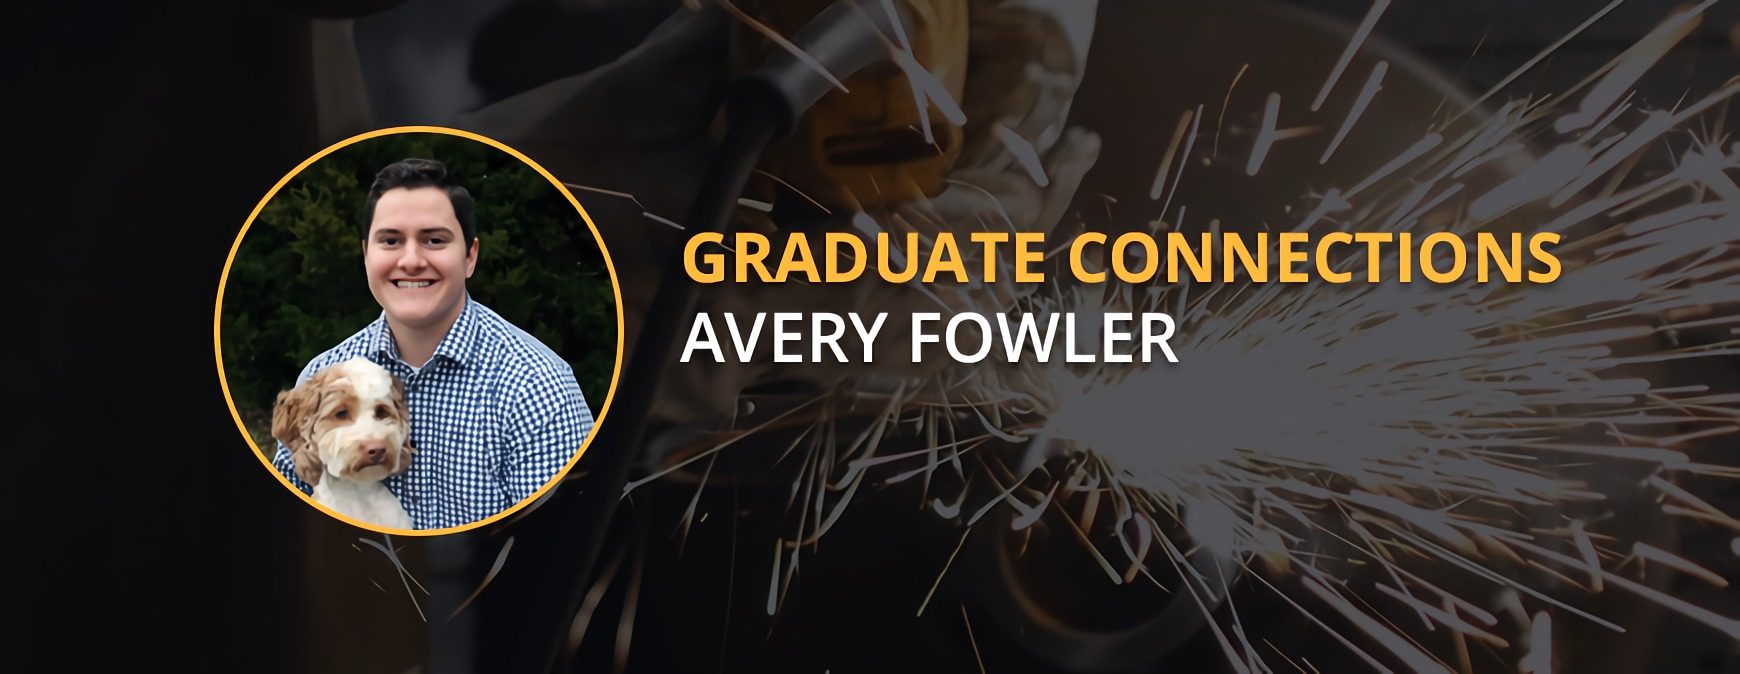 Avery Fowler Graduate Connections